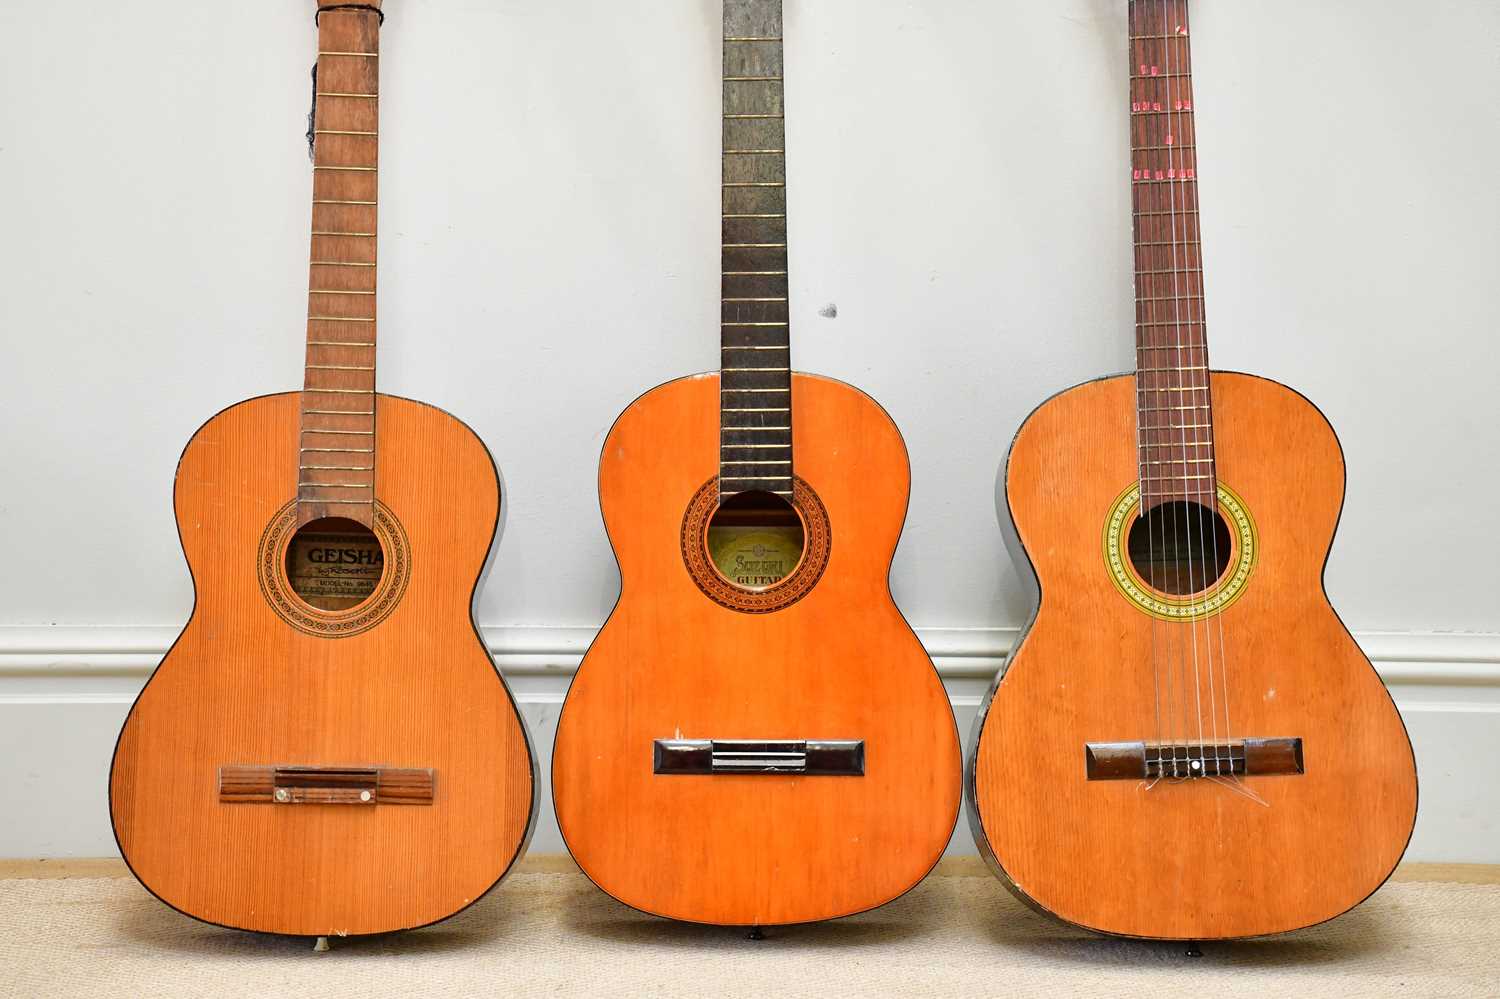 SUZUKI; a six string acoustic guitar, together with a Terada acoustic guitar and a Geisha acoustic - Image 3 of 6